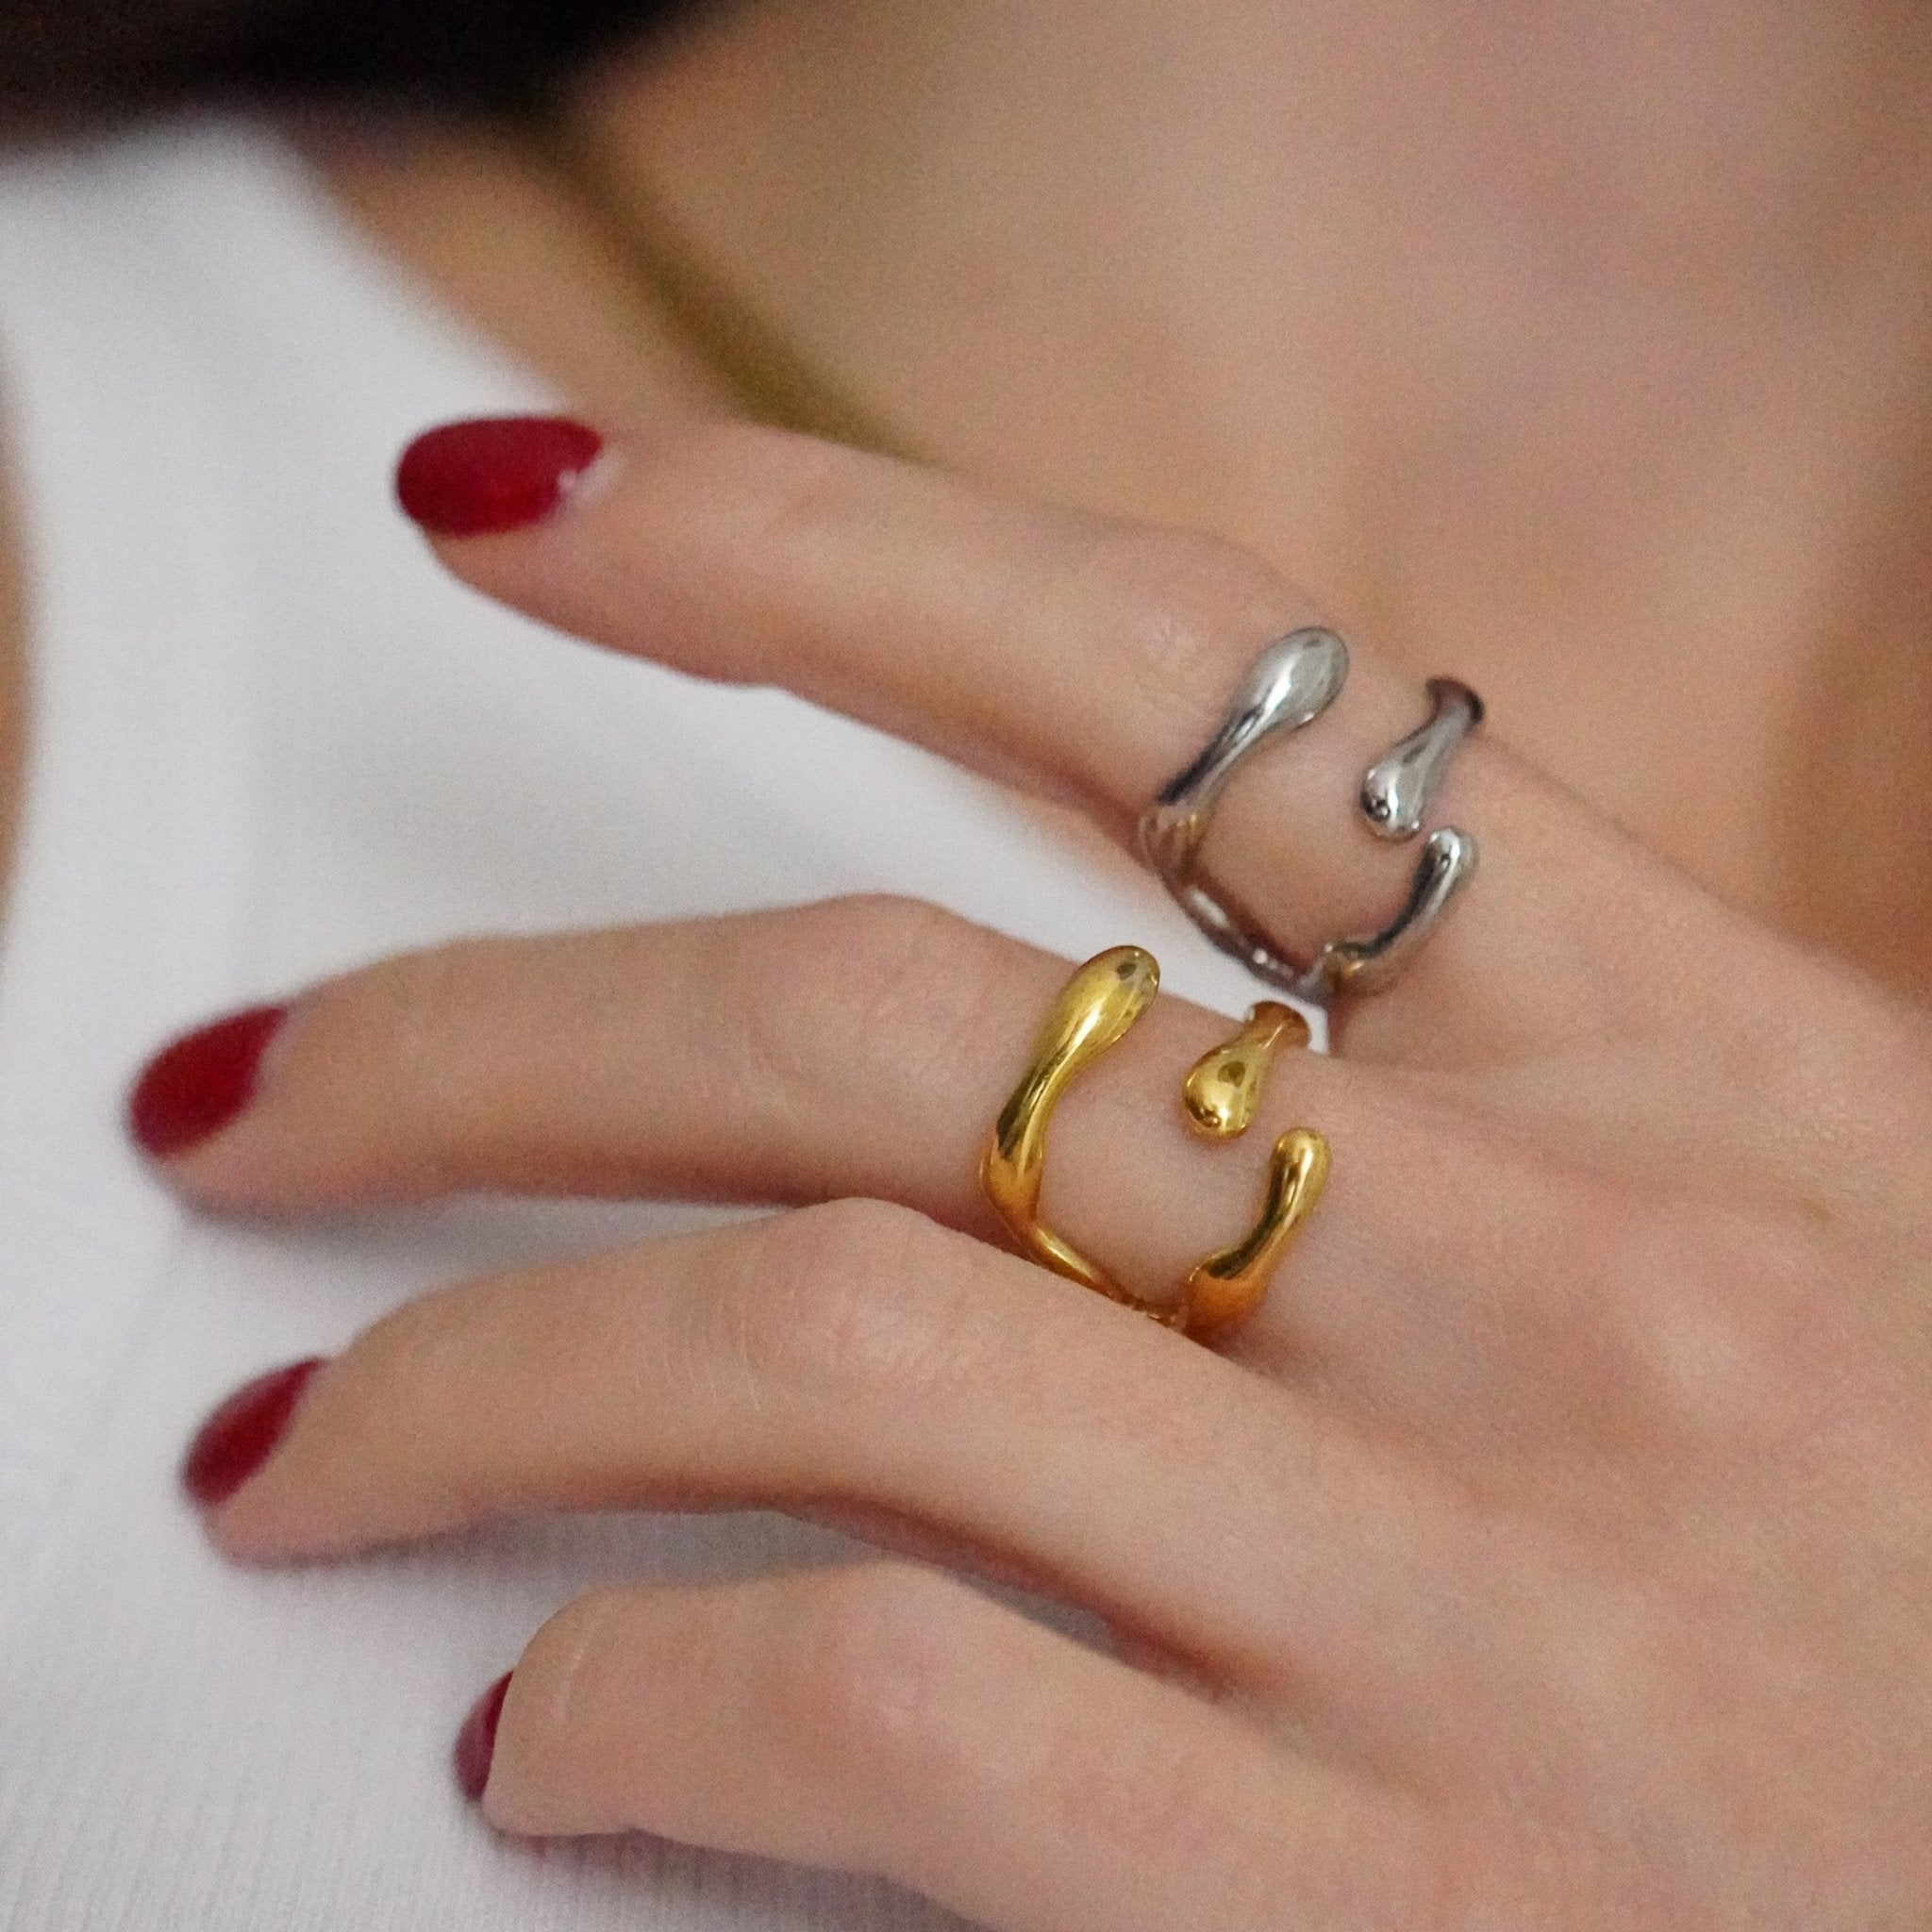 Chic Simplicity | Adjustable Ring - Jewel Your Way